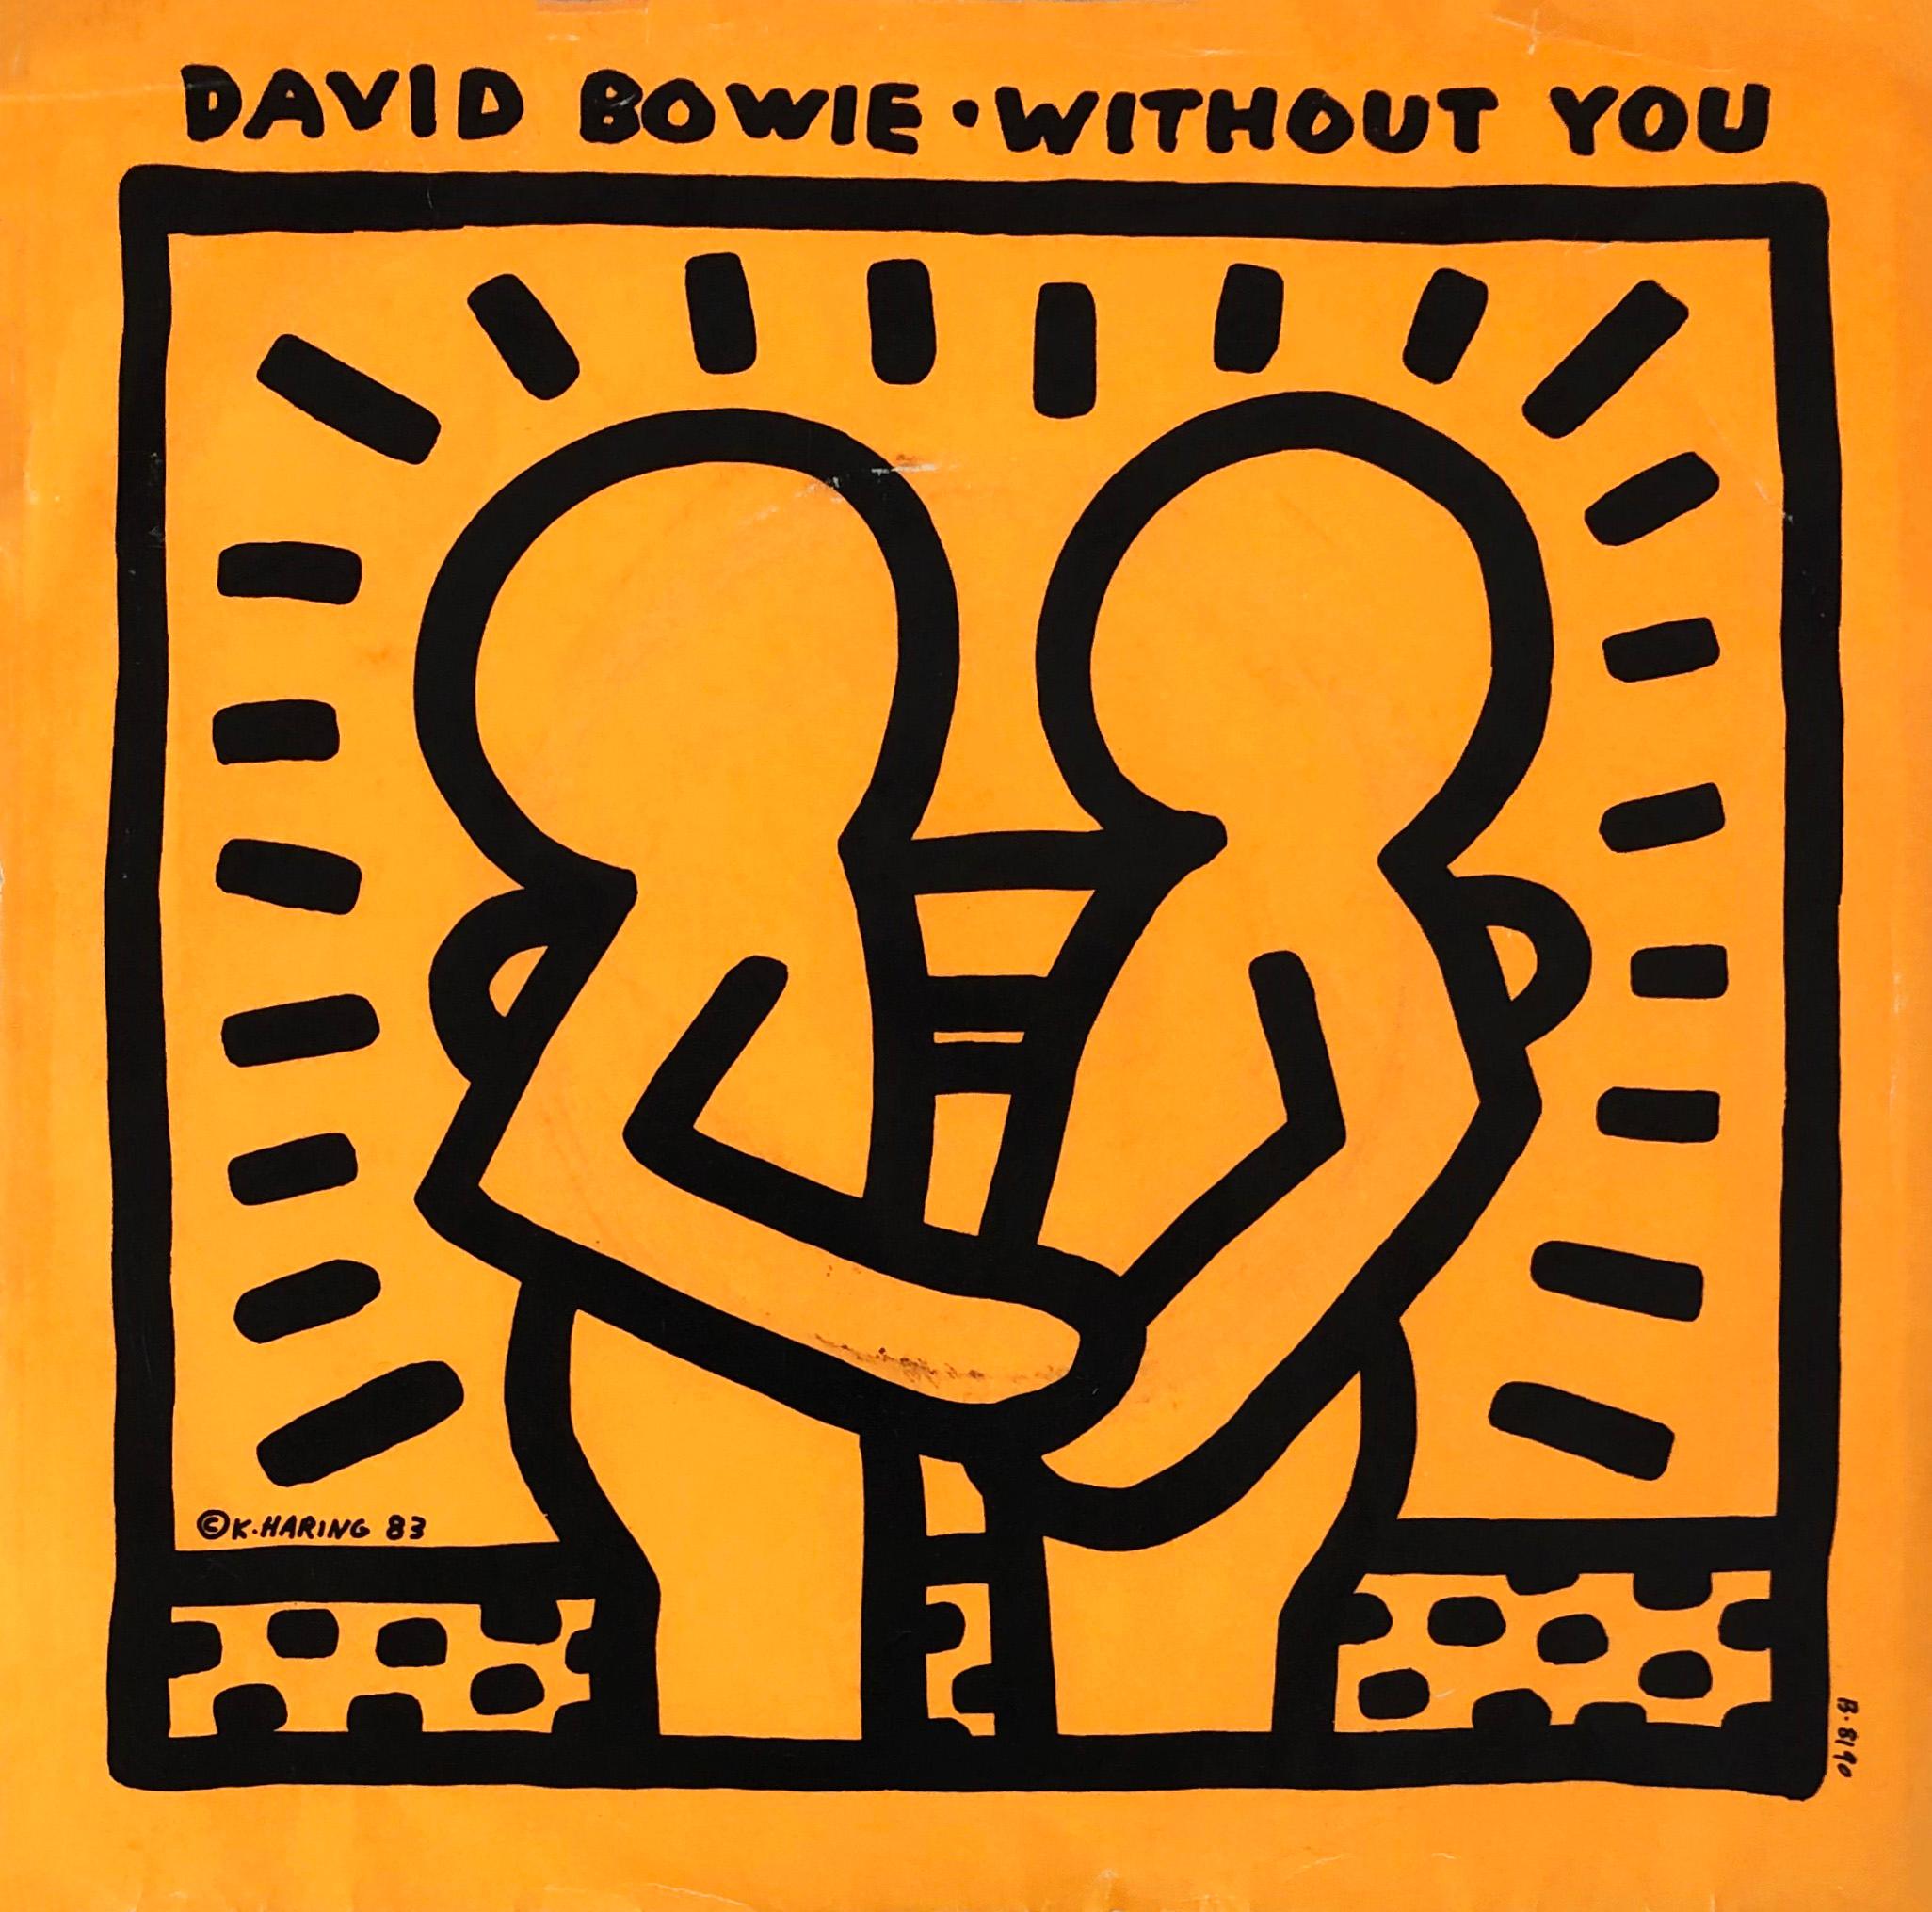 David BOWIE "Without You" A Rare Highly Sought After Vinyl Art Cover featuring Original Artwork by Keith Haring

Year: 1983

Medium: Off-Set Lithograph

Dimensions: 7 x 7 inches

Cover: Minor shelf wear and surface creasing; otherwise good condition